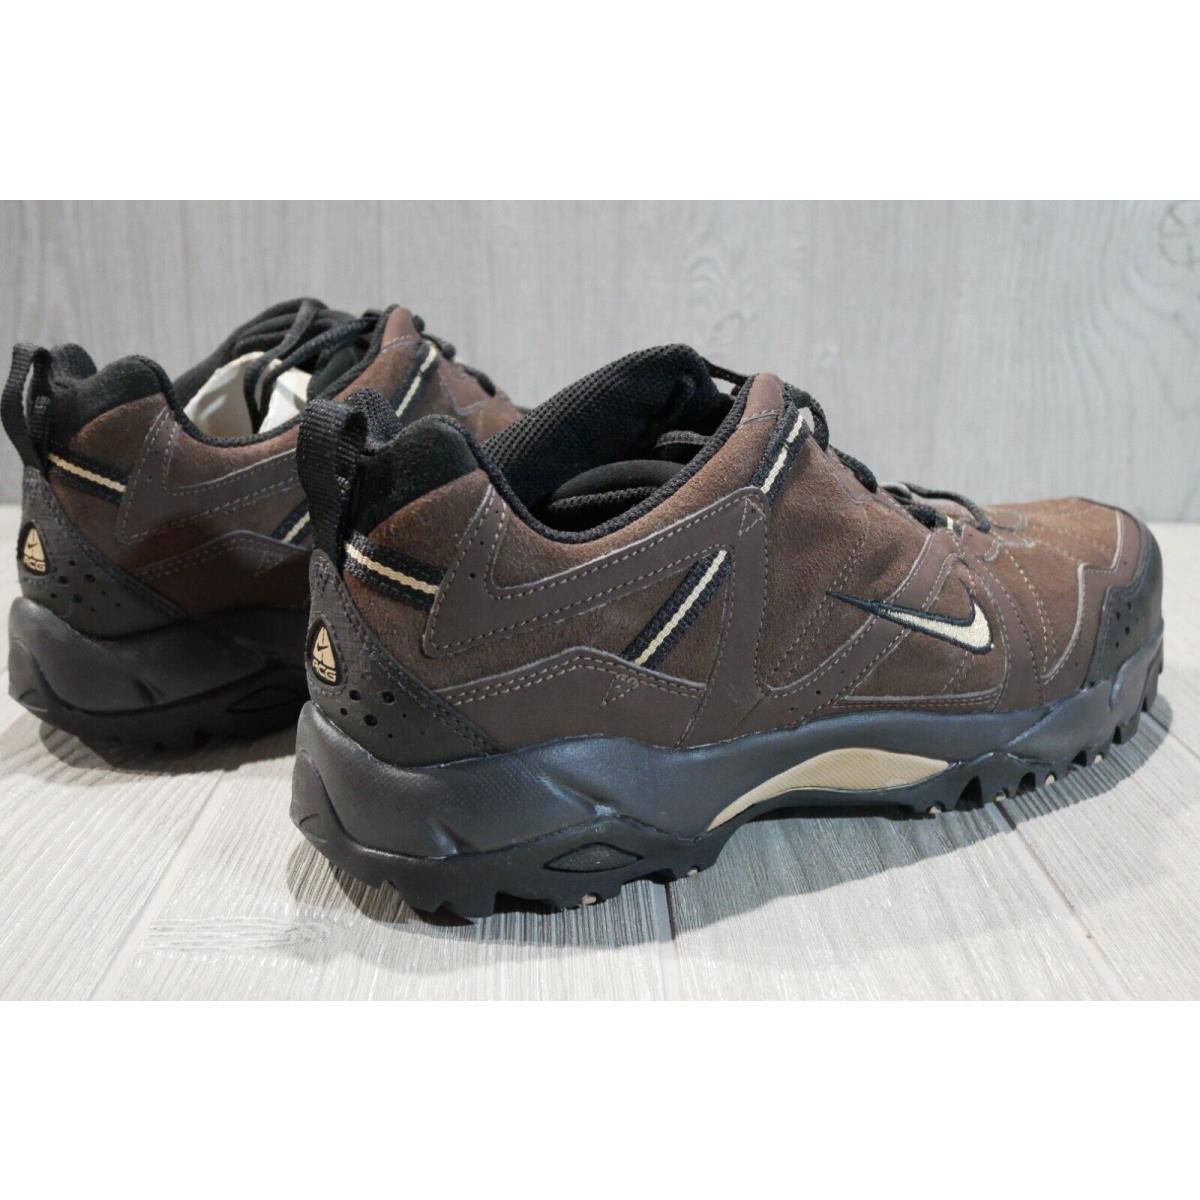 Nike shoes Bandolier - Brown 2